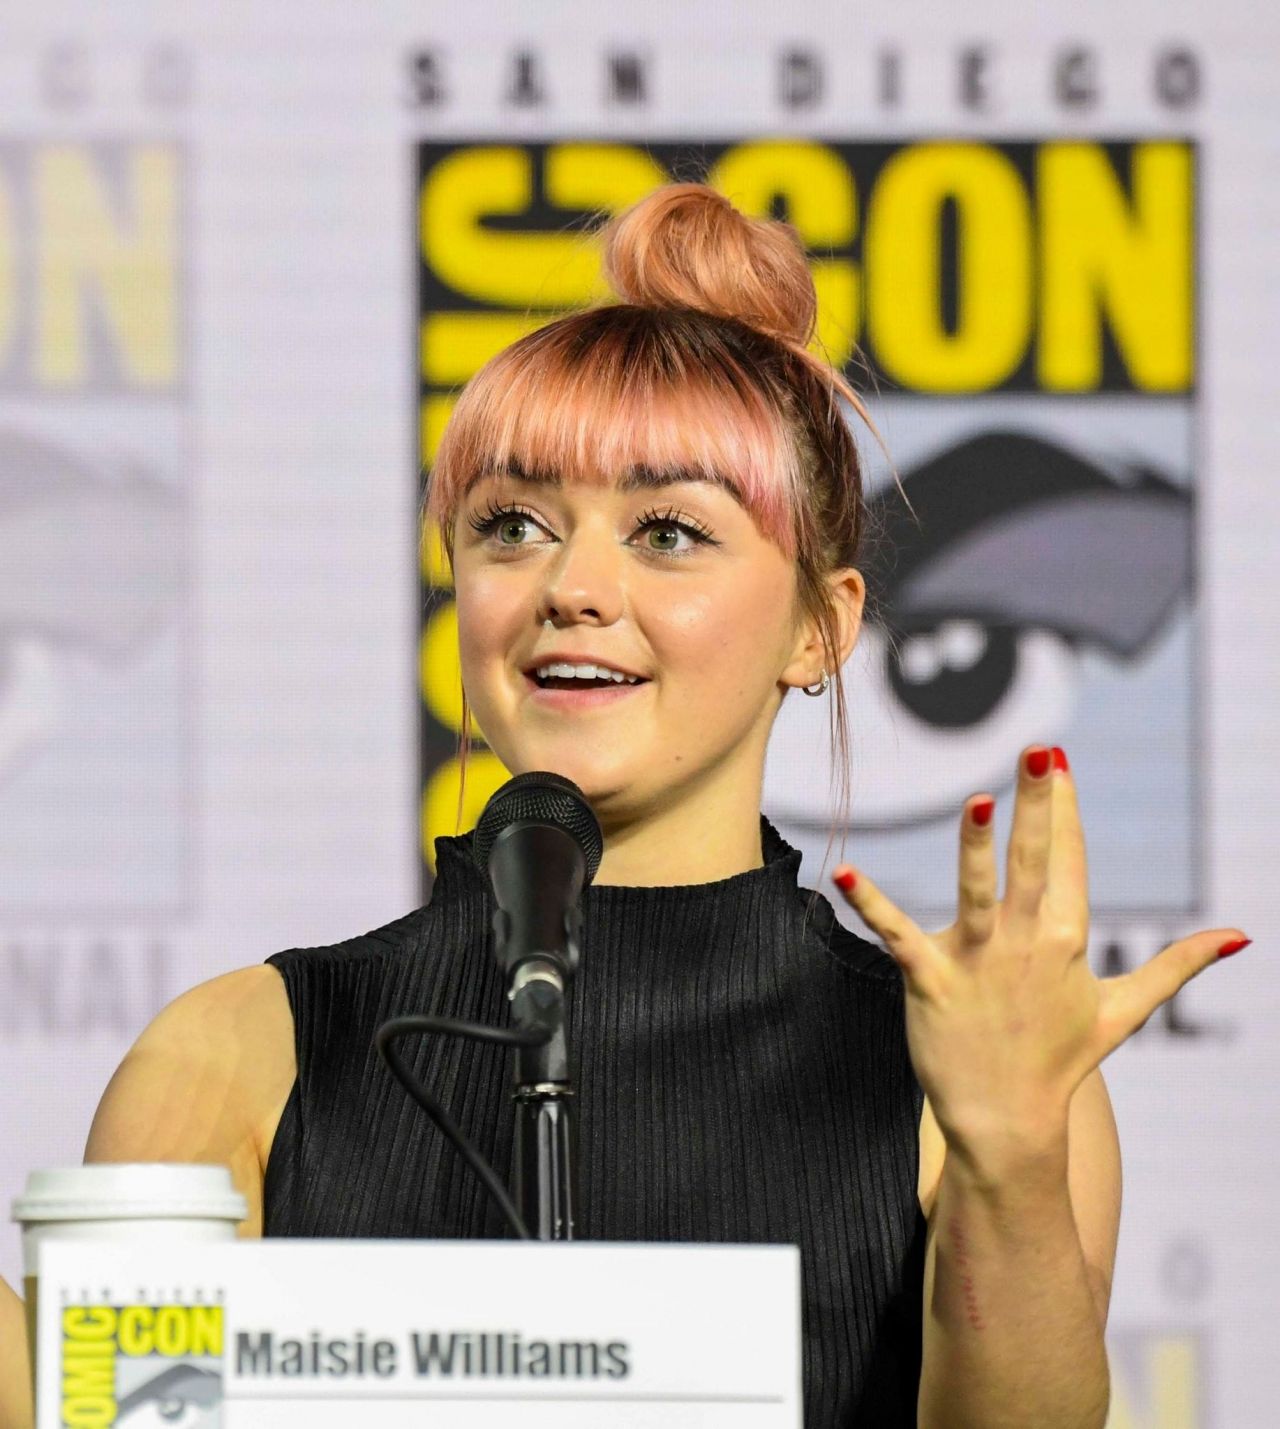 maisie-williams-game-of-thrones-panel-q-a-at-sdcc-2019-7.jpg